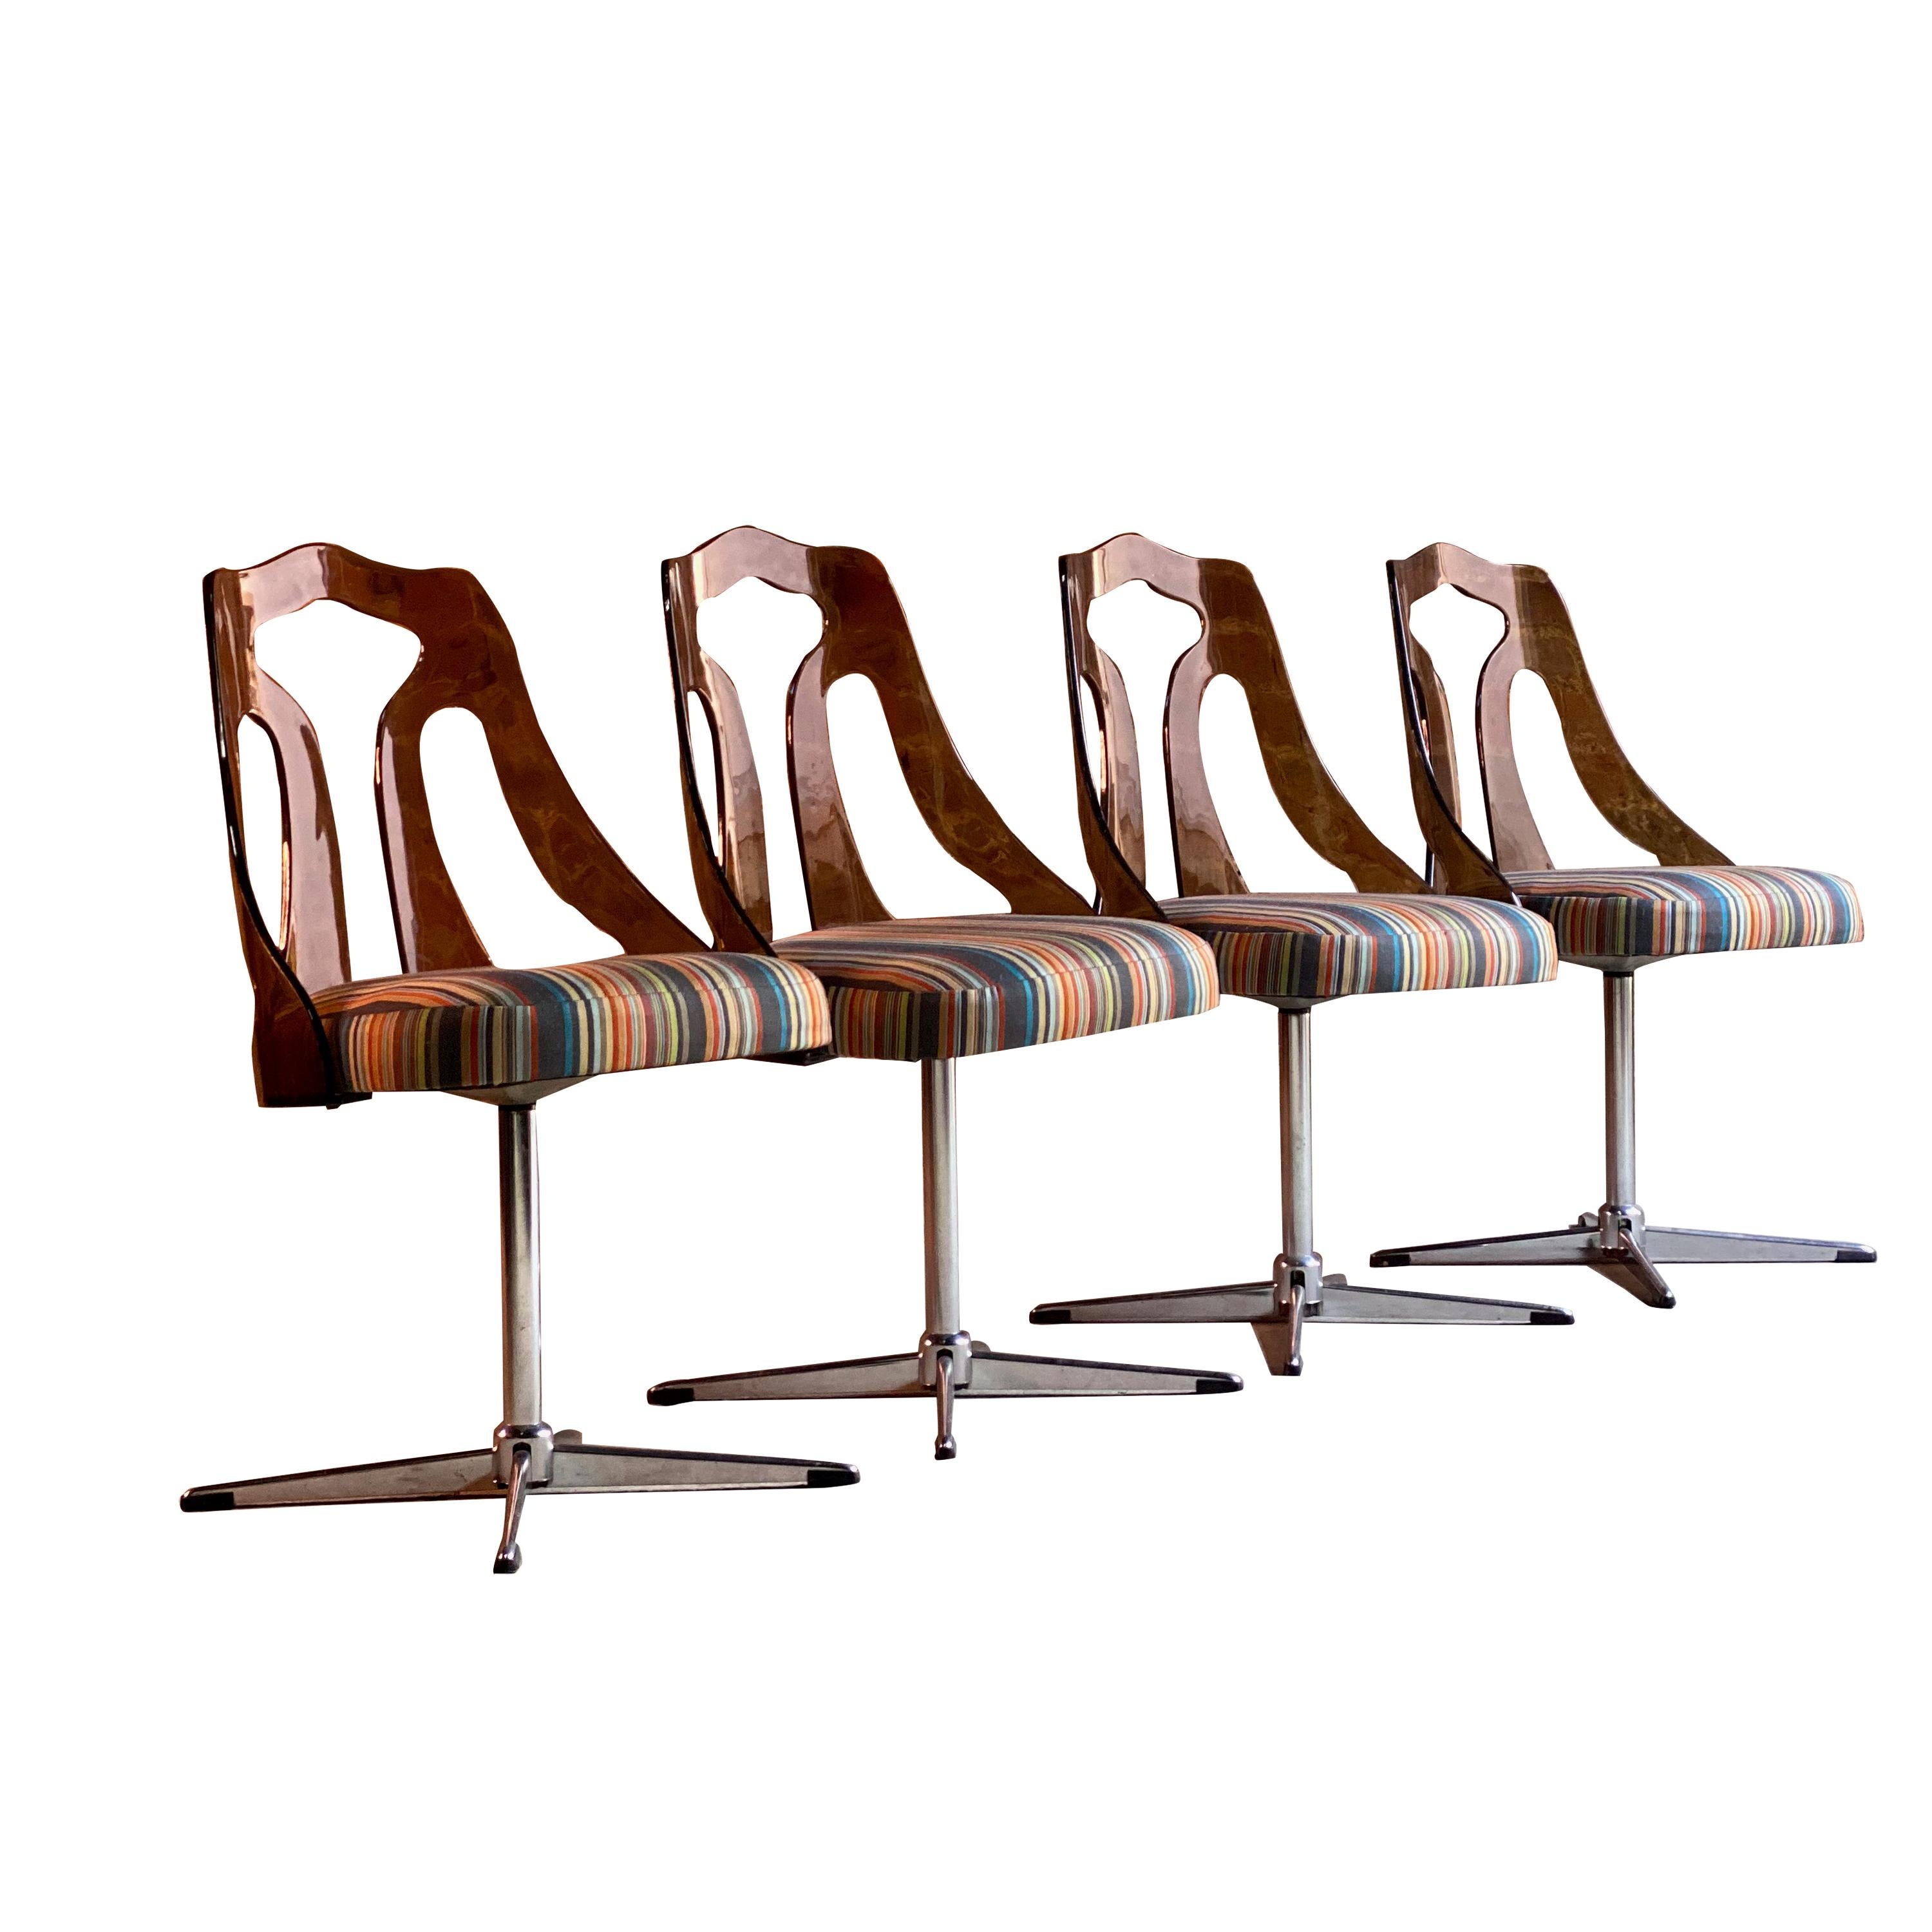 Paul Smith Ottoman Maharam Dining Chairs Set of Four circa 1960s Magnificent Set